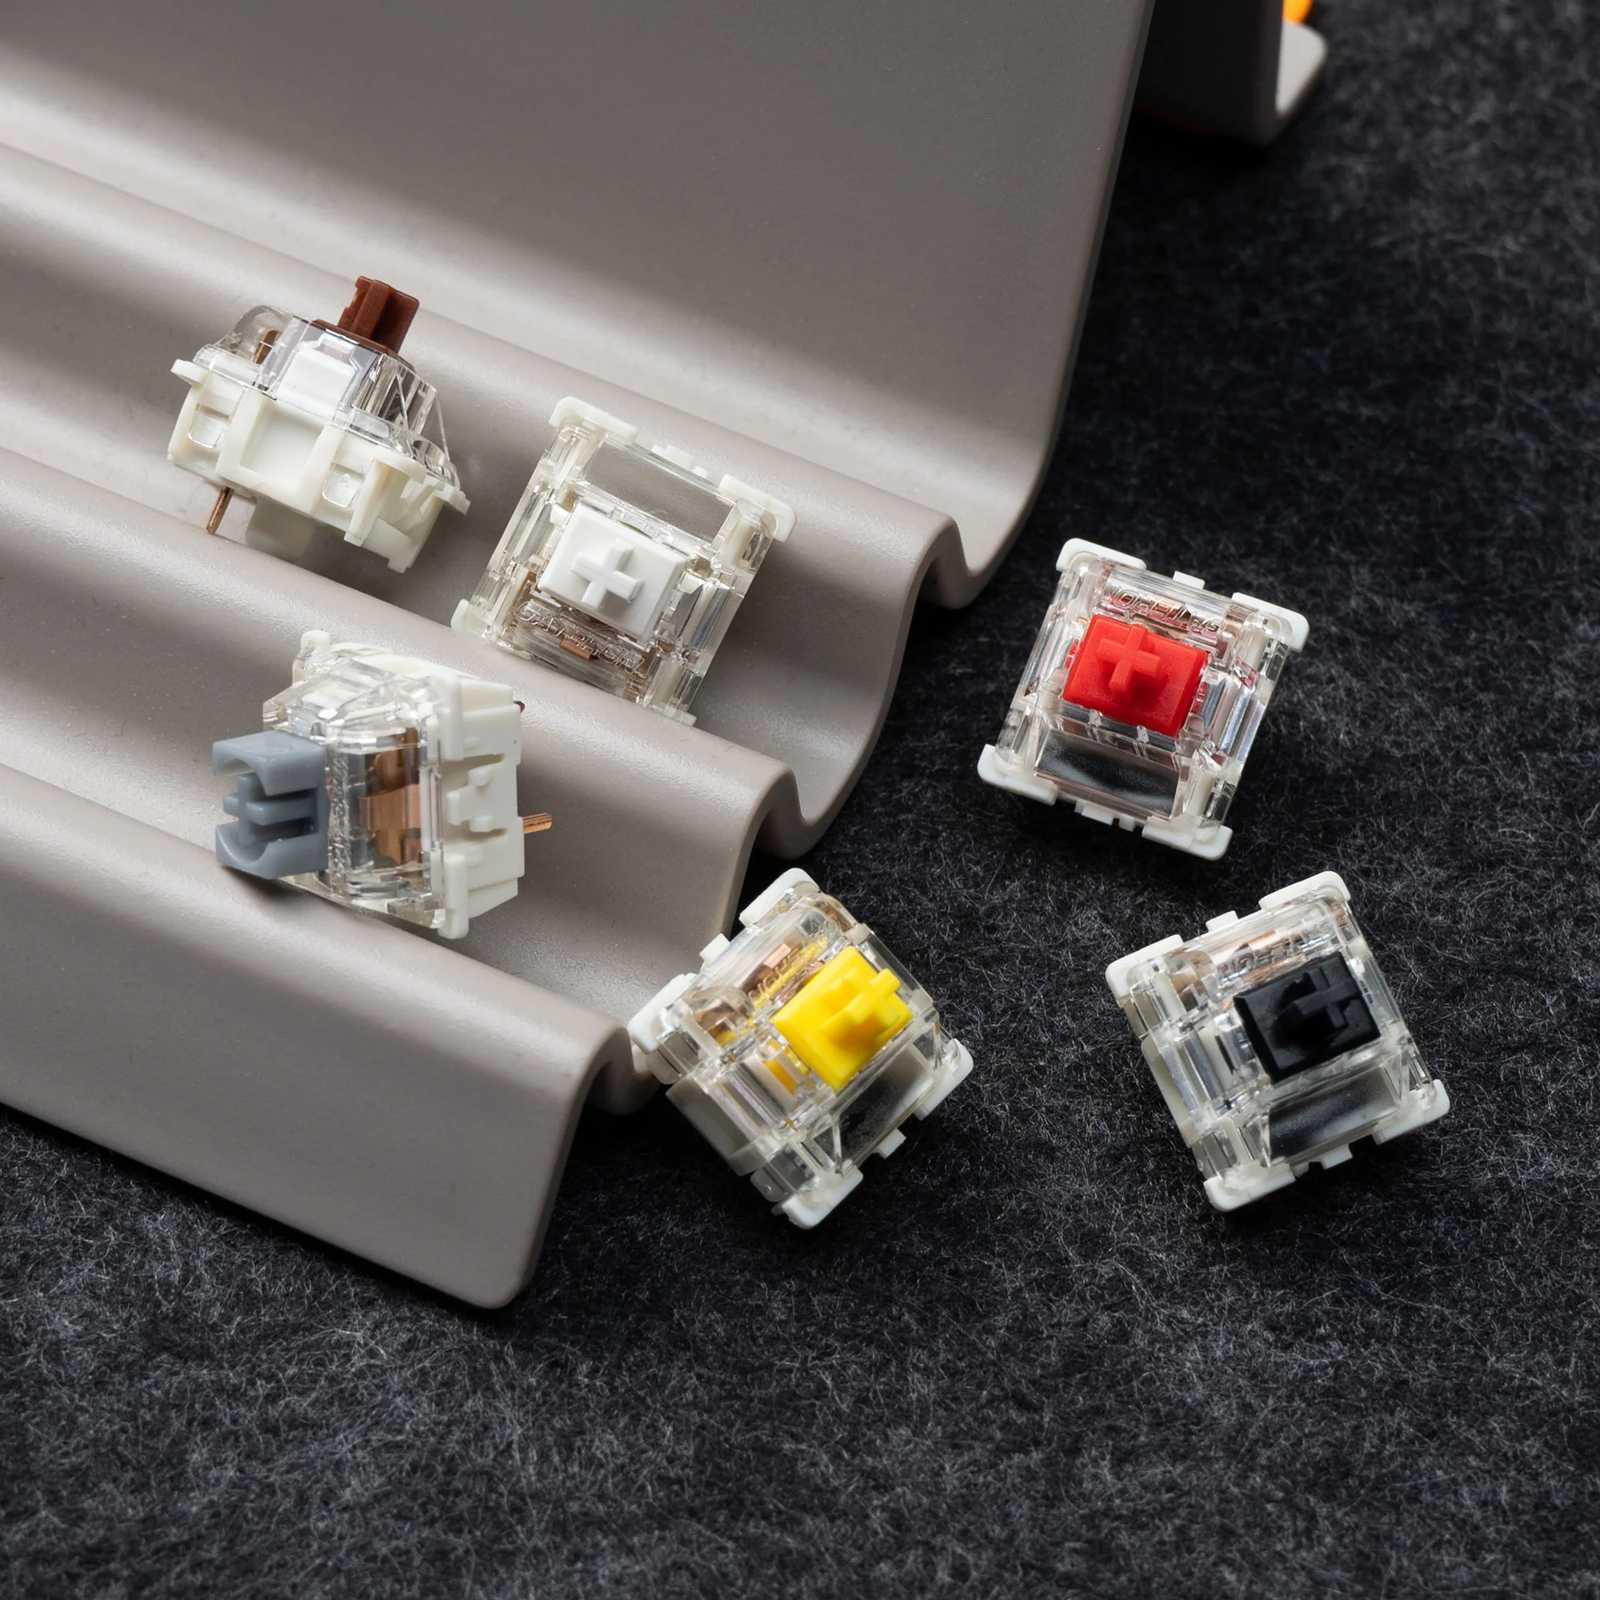 Glacier Gateron G Pro 3.0 Switches Set with Key Switches/Caps Puller Included